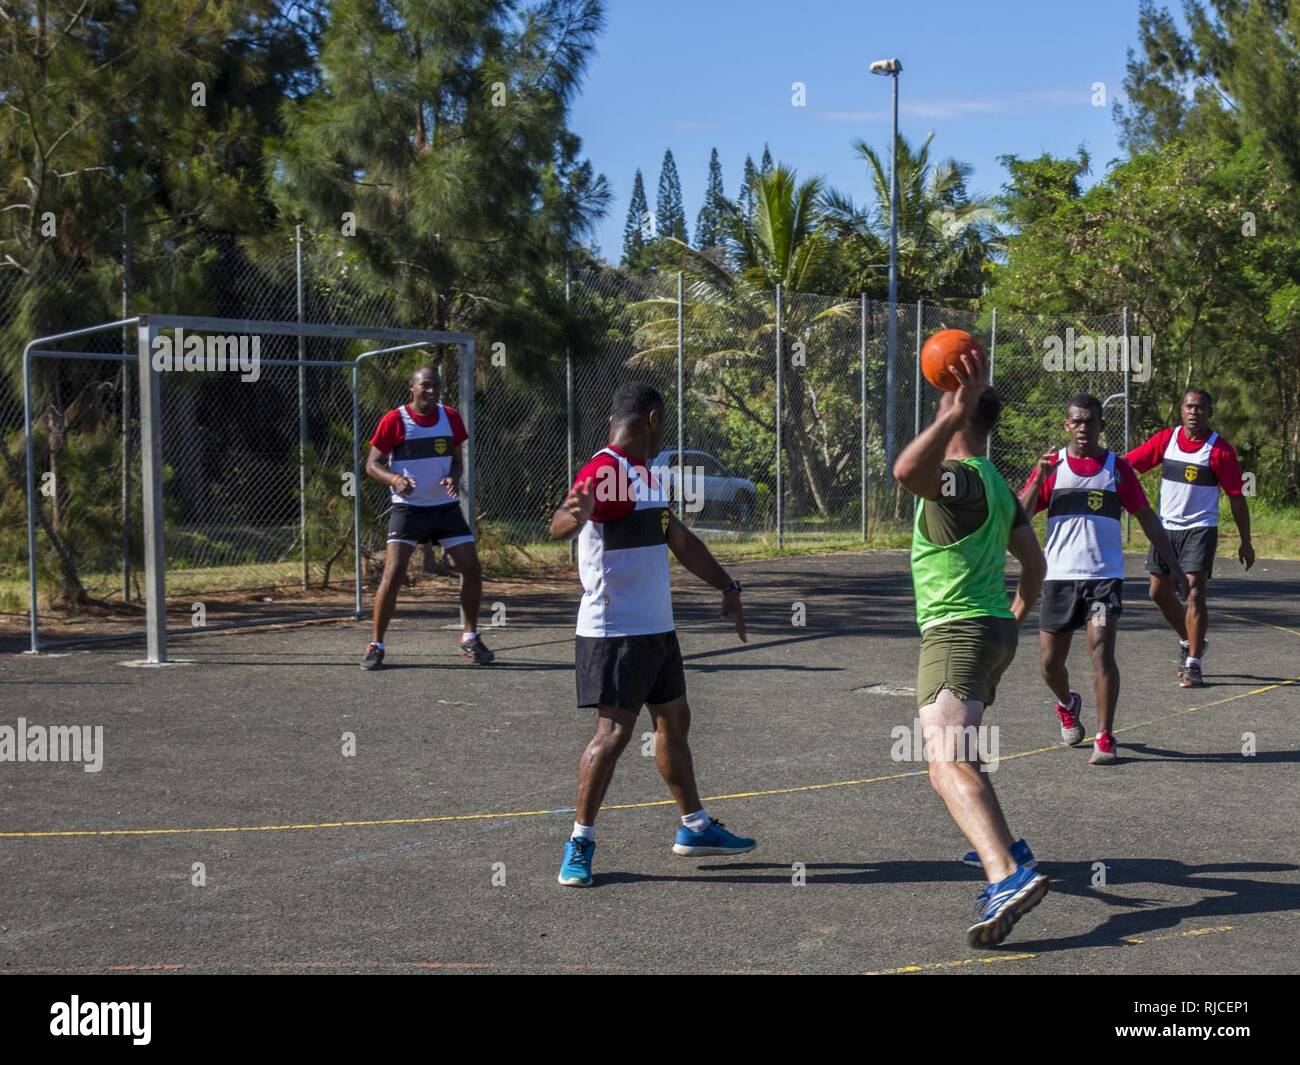 U.S. Marines with Combat Engineer Platoon, Task Force Koa Moana 16-4, integrate with the Republic of Fiji Military Forces and play hand ball during Croix Du Sud in Plum, New Caledonia, Nov. 6, 2016. Croix Du Sud is a multi-national, humanitarian assistance disaster relief and non-combatant evacuation operation exercise conducted every two years to prepare nations in the event of a cyclone in the South Pacific. The Koa Moana exercise seeks to enhance senior military leader engagements between allied and partner nations in the Pacific with a collective interest in military-to-military relations. Stock Photo